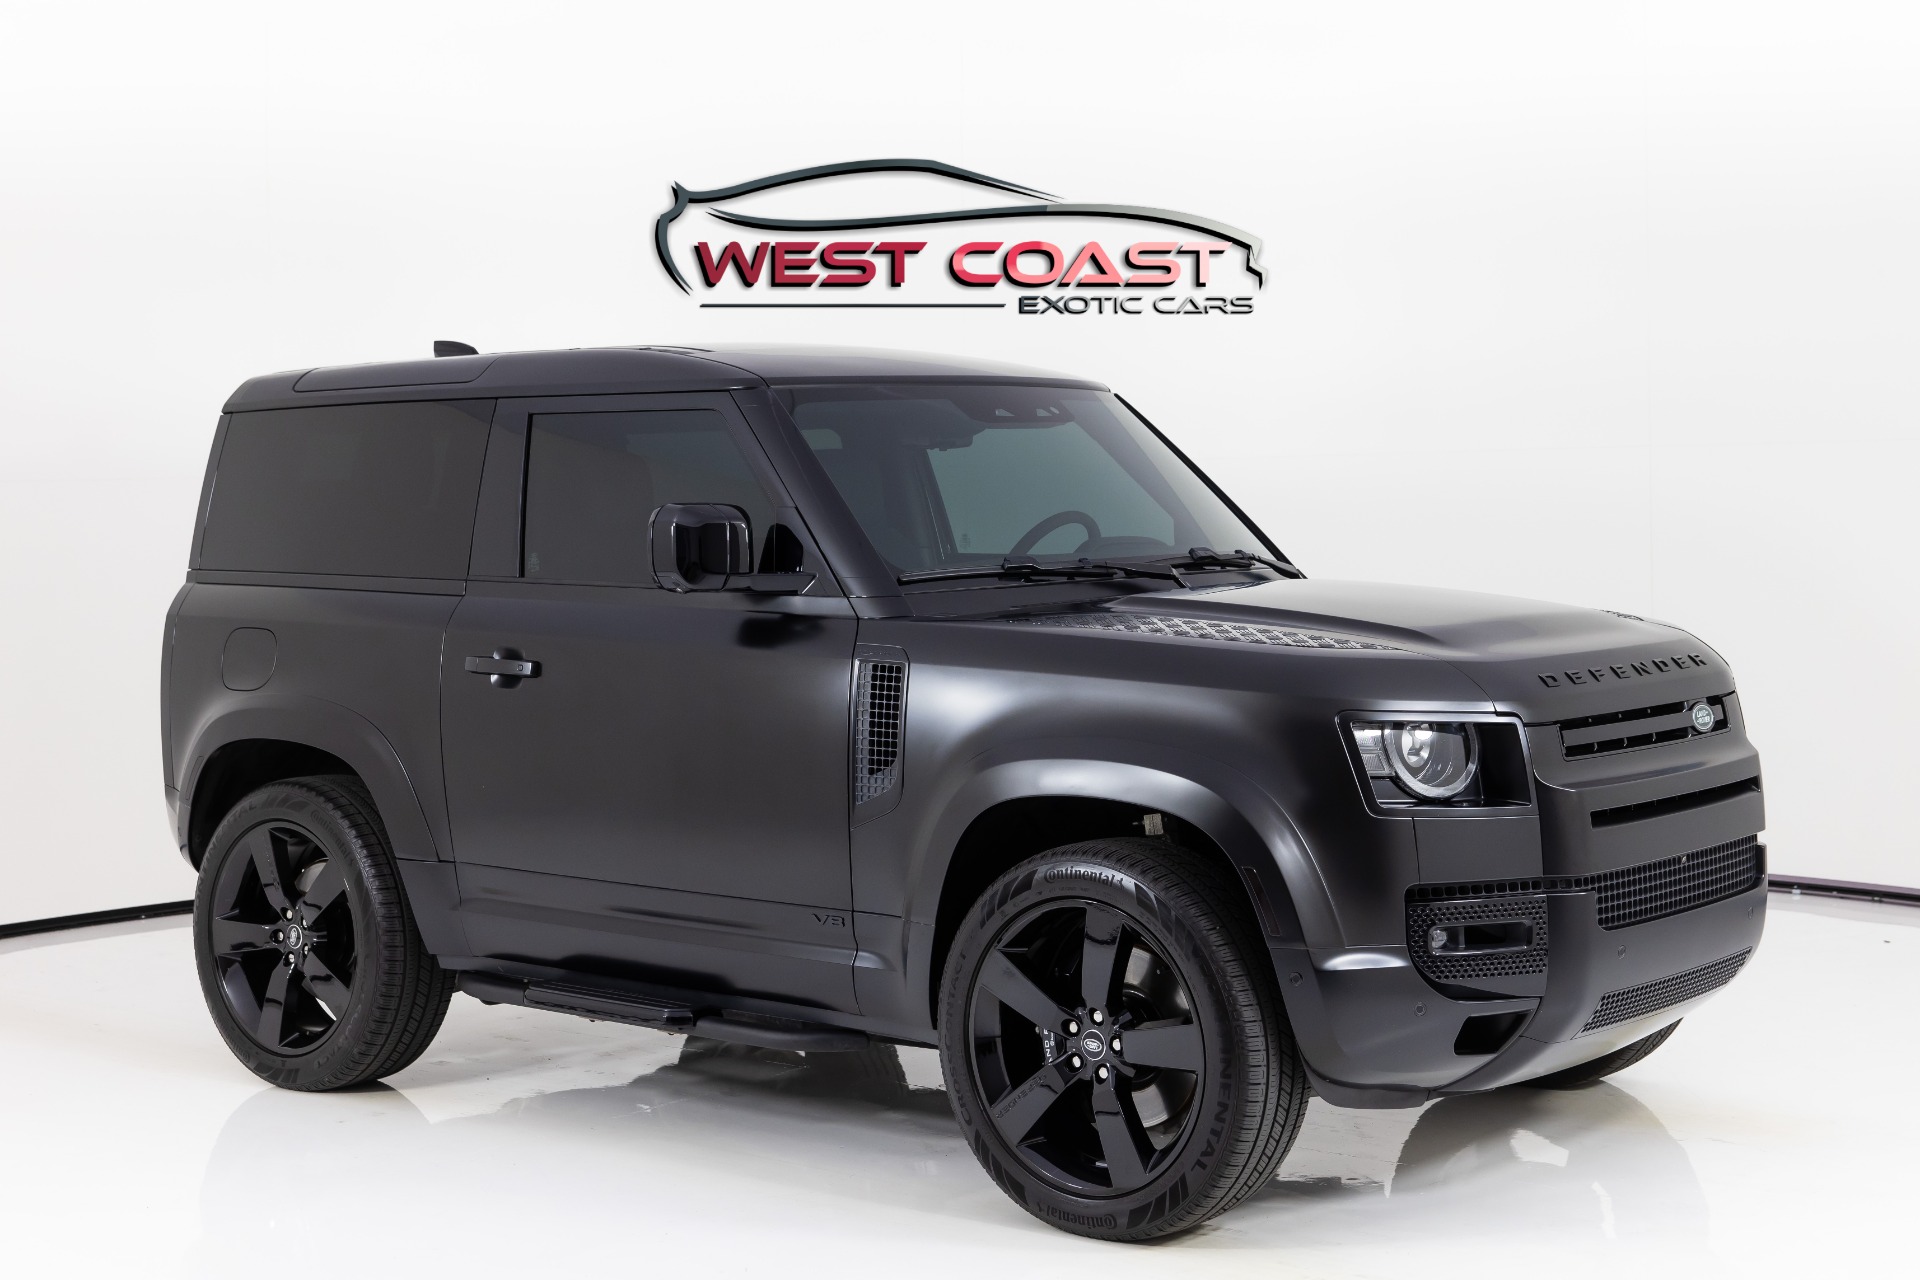 Black Land Rover Defender 110X XPEL Stealth Matte PPF Install